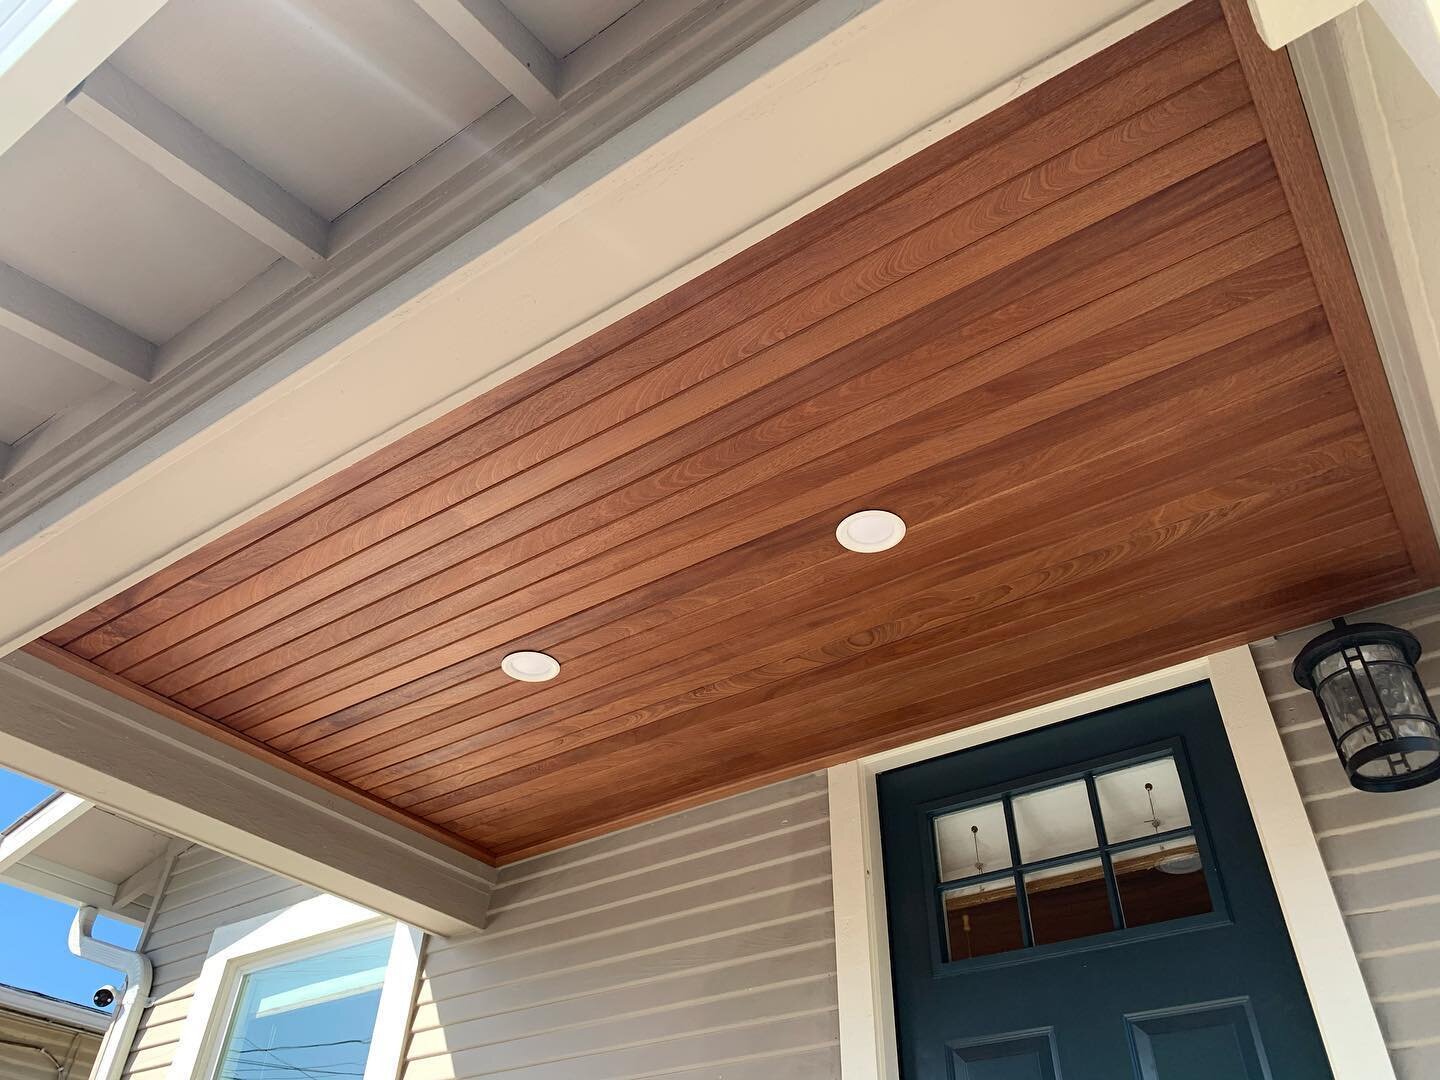 Clad the  front porch ceiling on my 1925 craftsman bungalow with some mahogany, and added a couple recessed lights. Before, during, and after pics. 
#craftsman #mahogany #frontporch #vorrathwoodworks